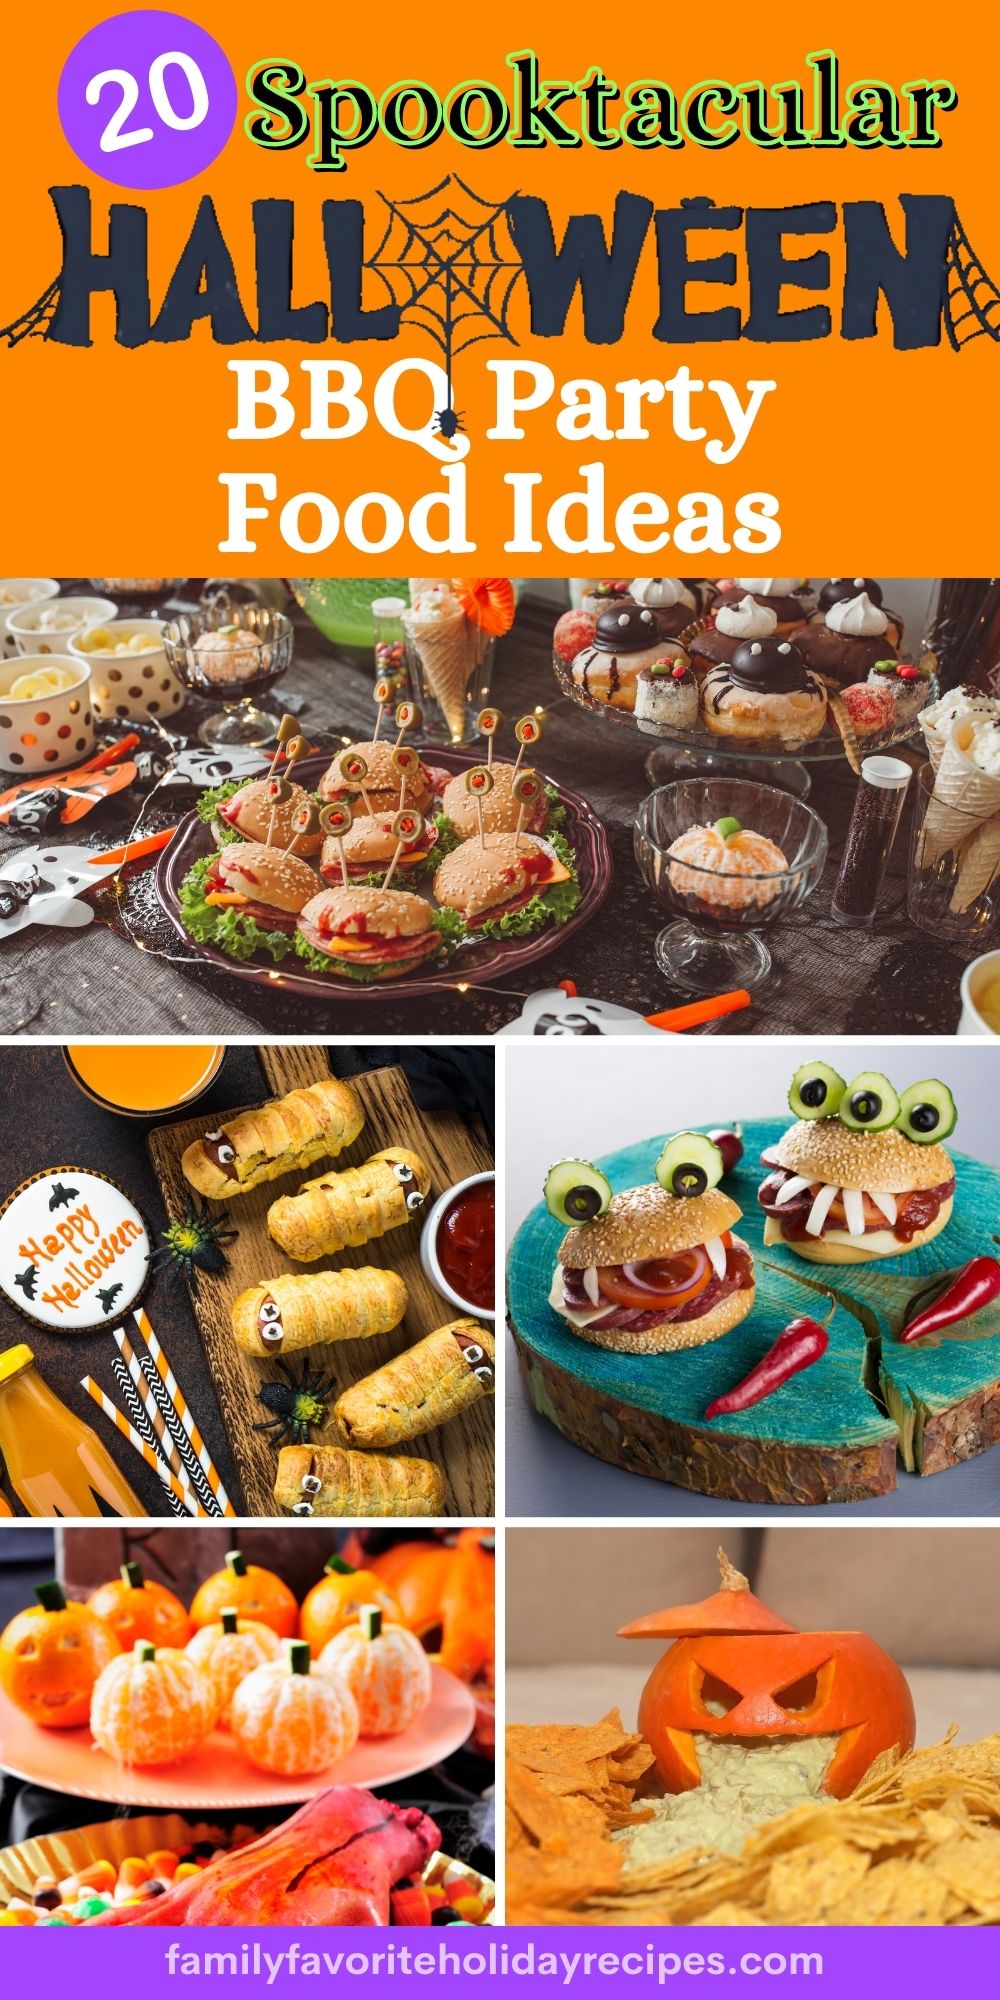 collage image featuring various Halloween BBQ food ideas, including sandwiches, hot dogs, fruit, dip, and more. An overlay reads, "20 Spooktacular Halloween BBQ Party Food Ideas"